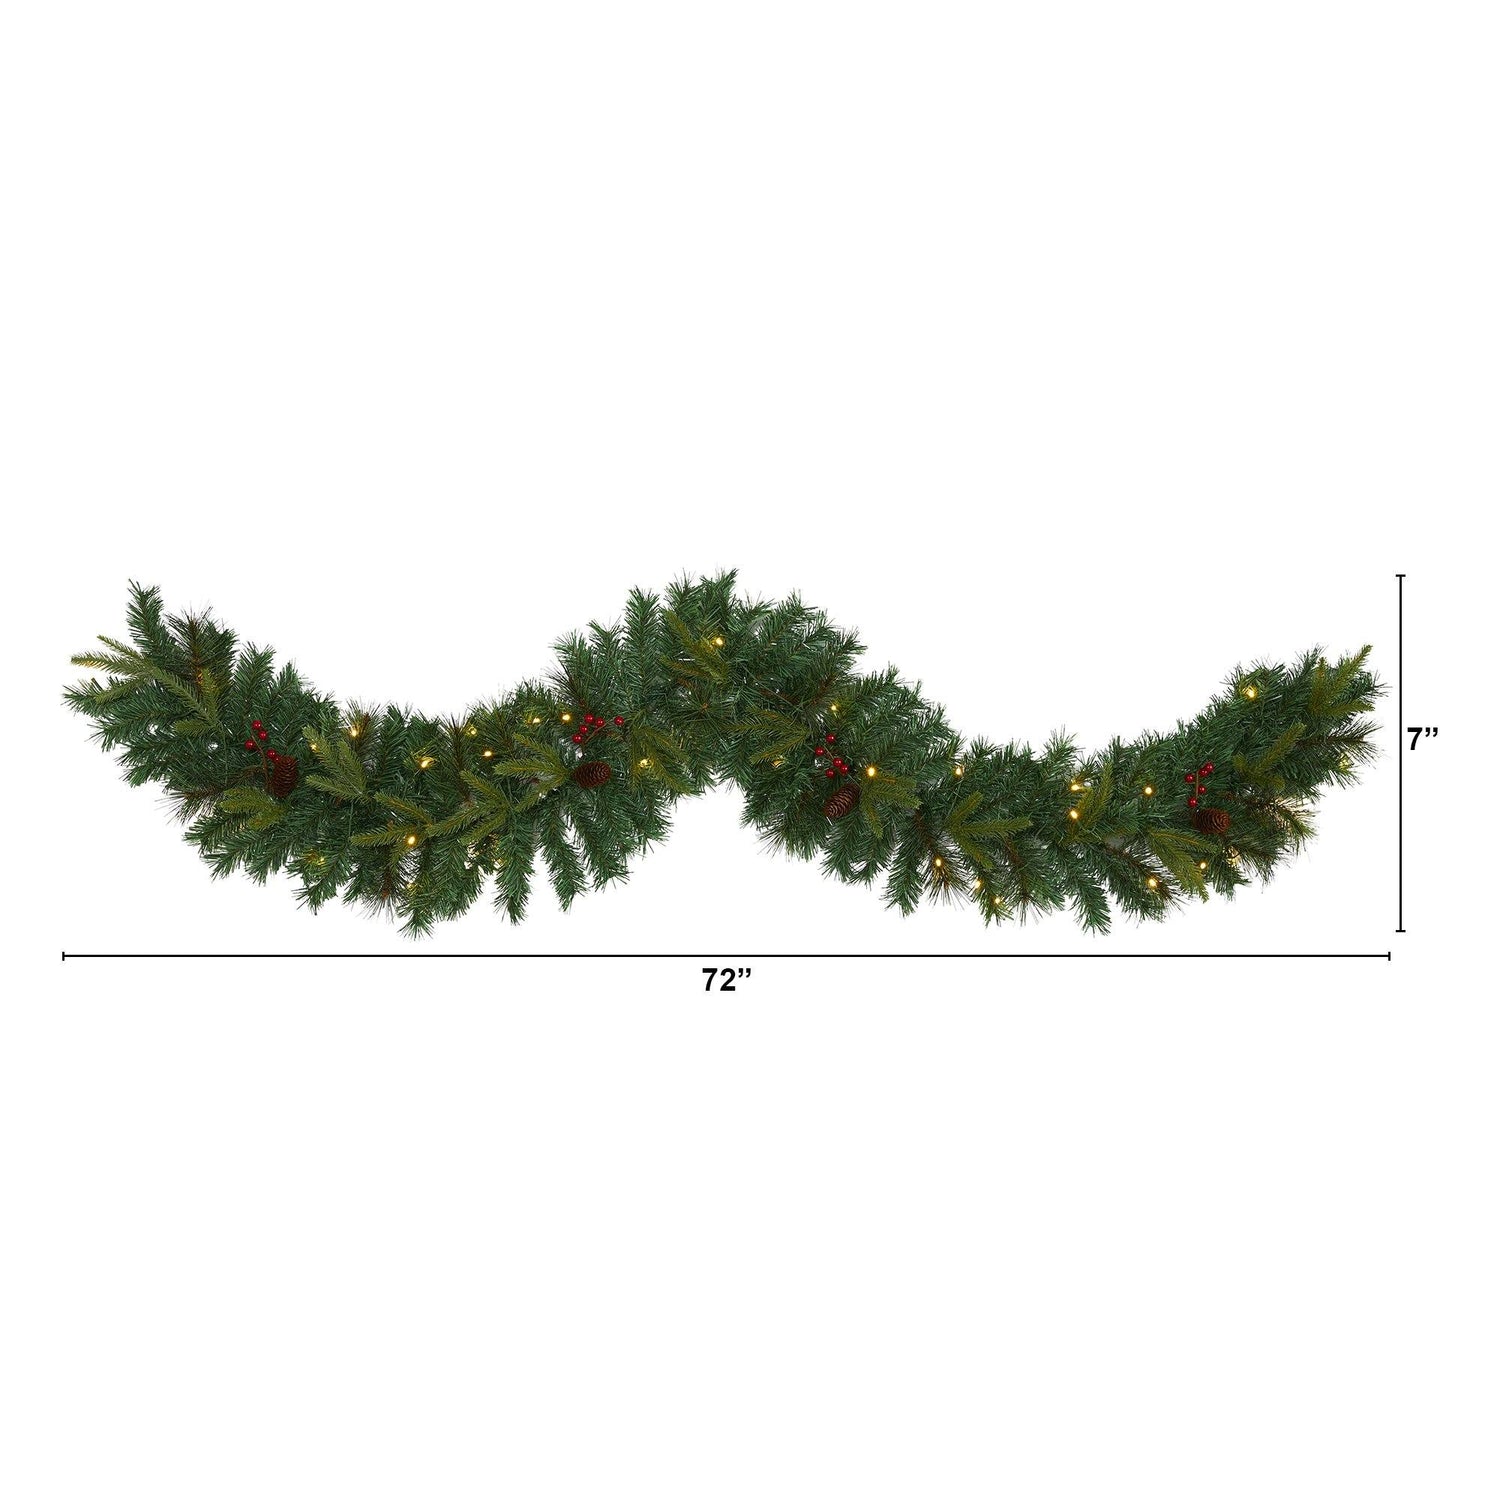 6’ Mixed Pine Artificial Christmas Garland with 35 Clear LED Lights, Berries and Pinecones